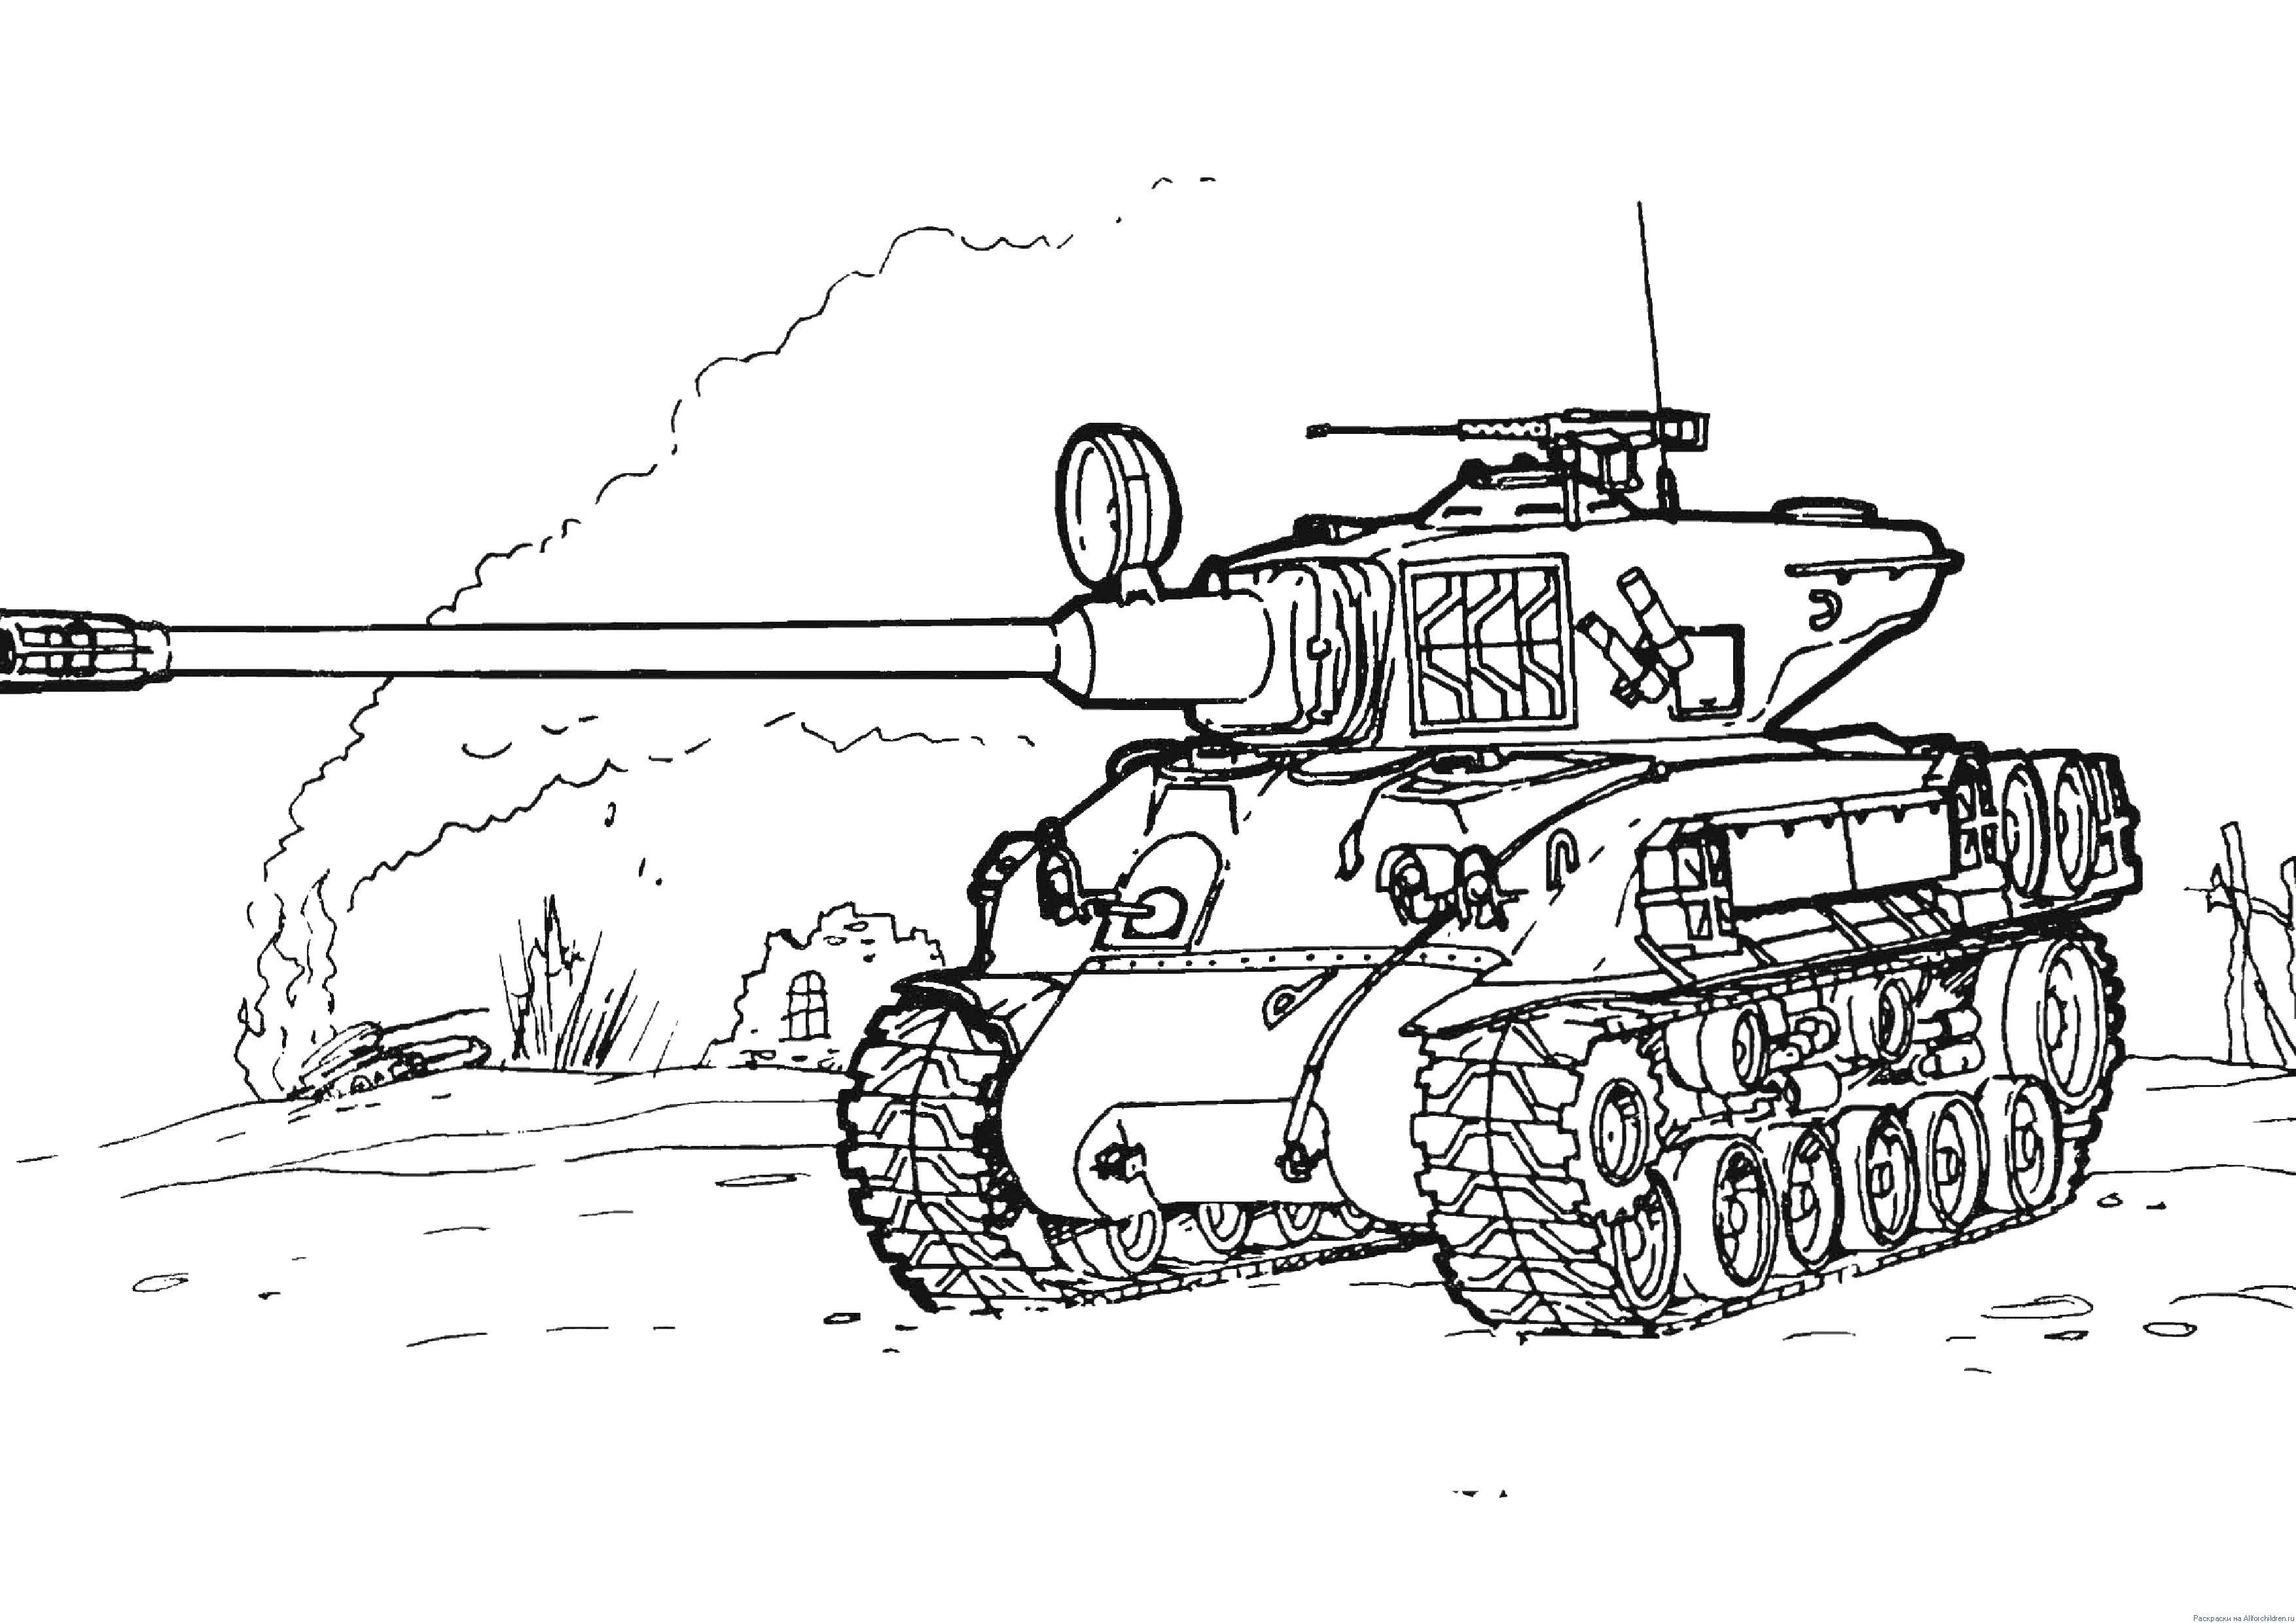 Coloring Military tank. Category military coloring pages. Tags:  Tank, transportation, machinery, military.